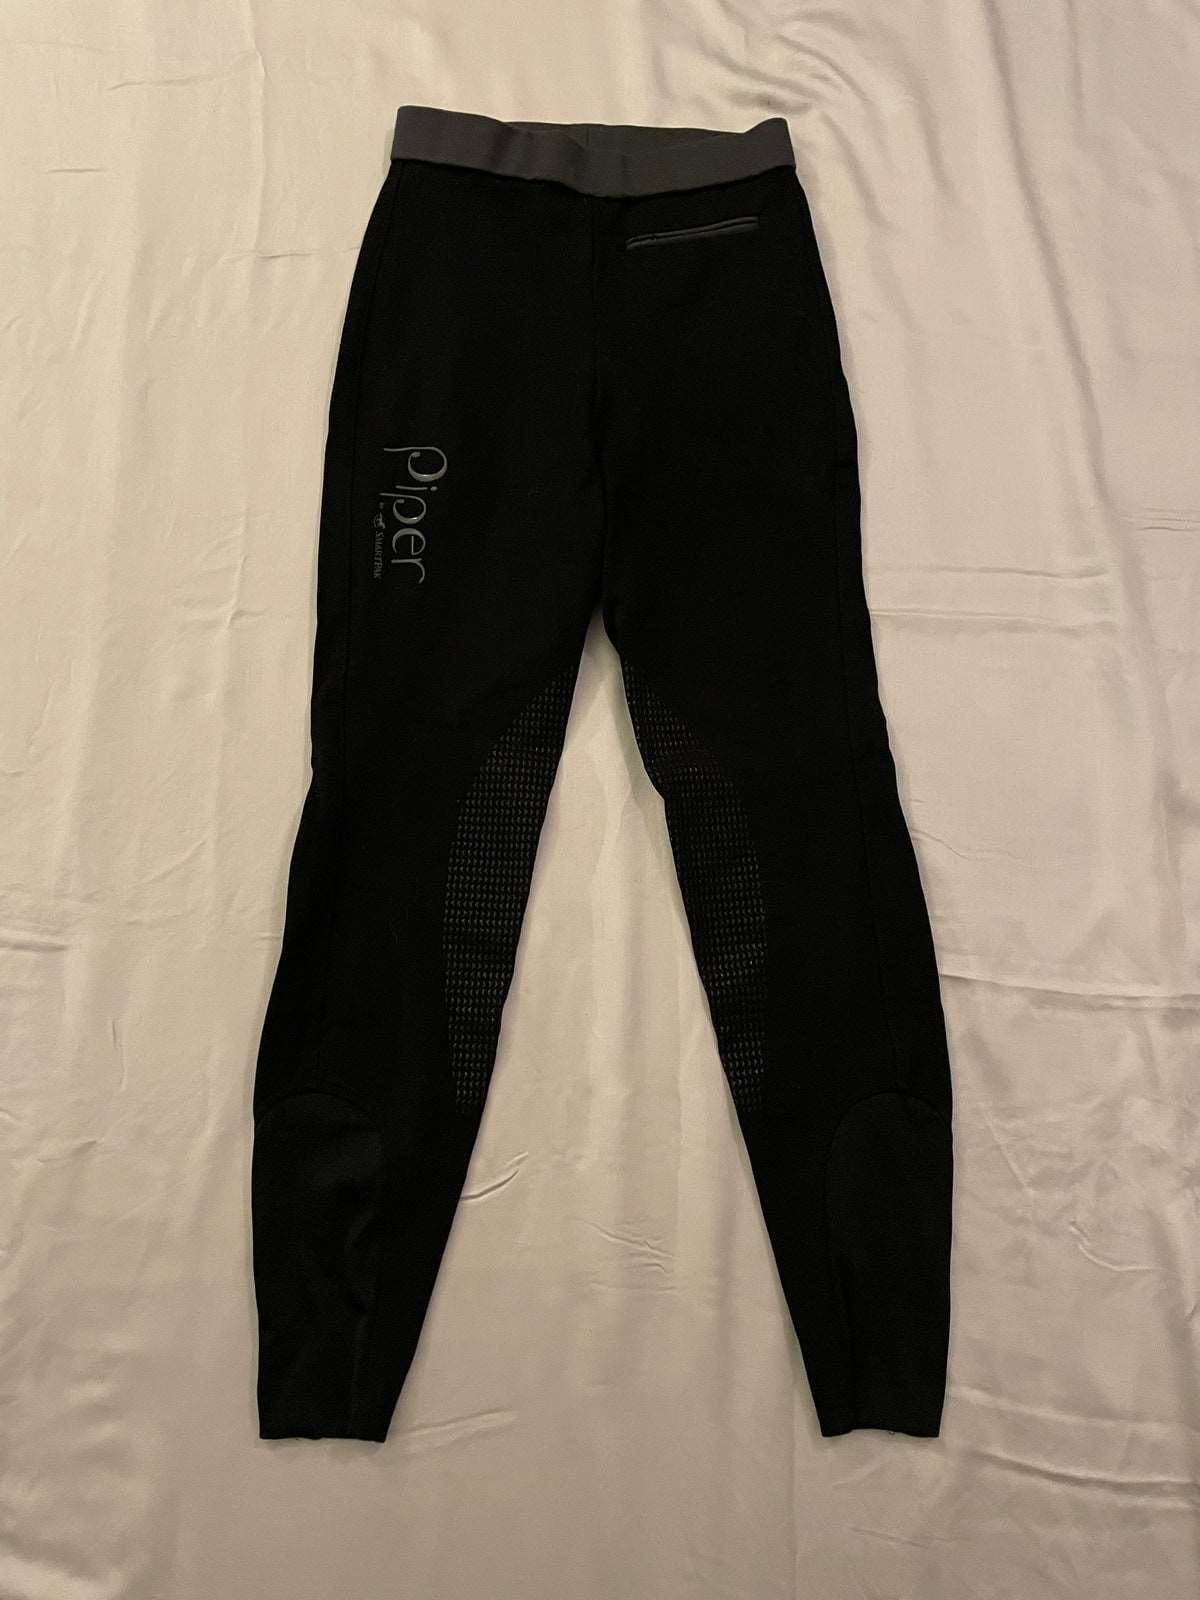 ThriftedEquestrian Clothing 22R Smartpak Piper Knee Patch Tights - 22R